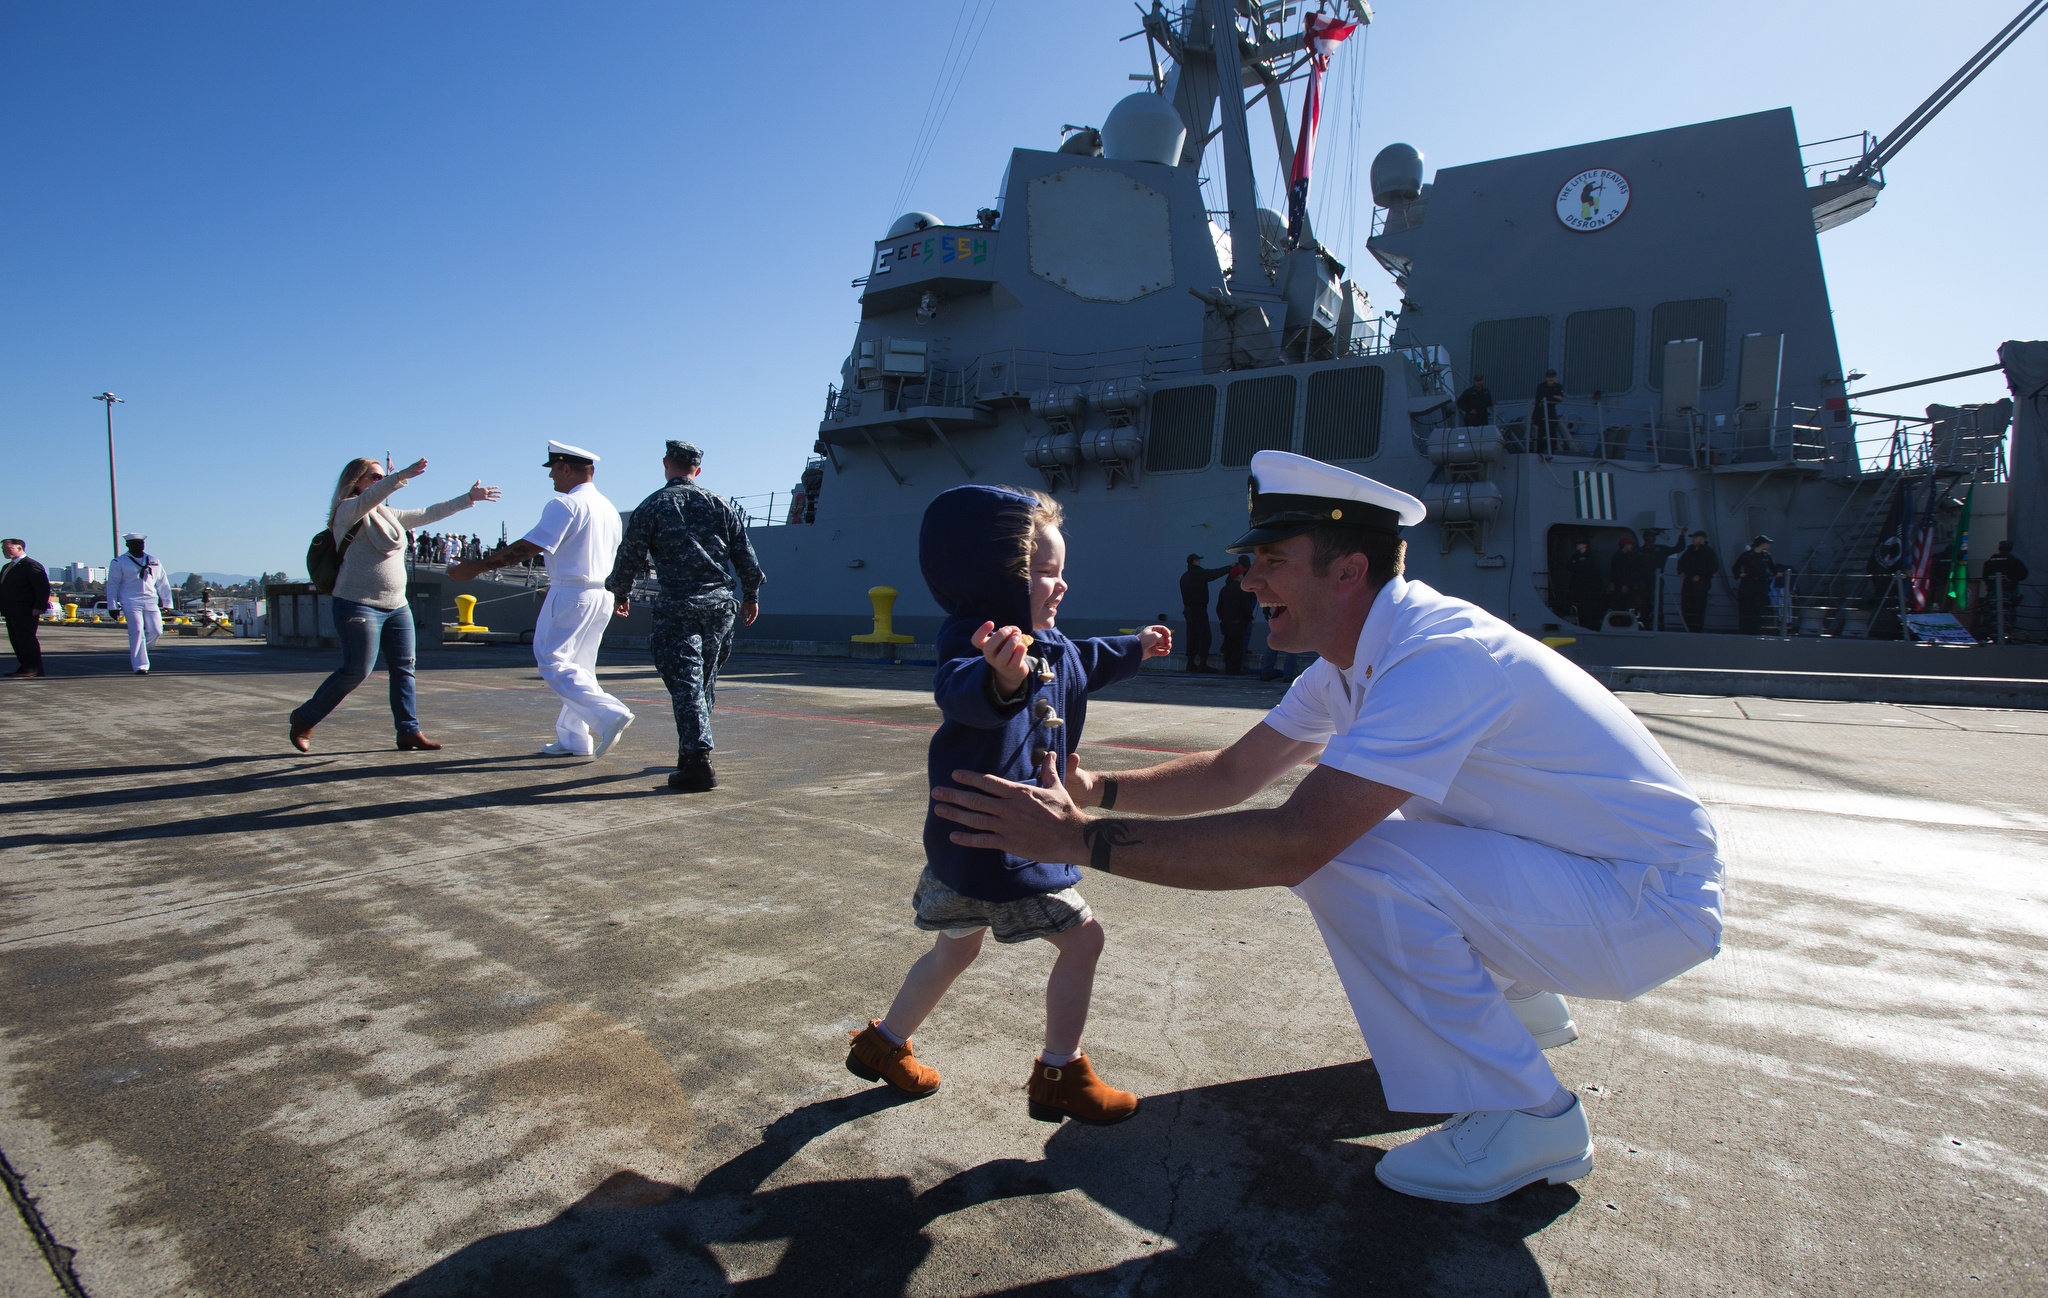 Amelia Carpenter, 3, runs to her father Chief Travis Carpenter during the USS Sampson (DDG 102) arrival at Naval Station Everett on Monday. The Arleigh-Burke Class destroyer is the second of four new destroyers to be based in Everett. (Andy Bronson / The Herald)